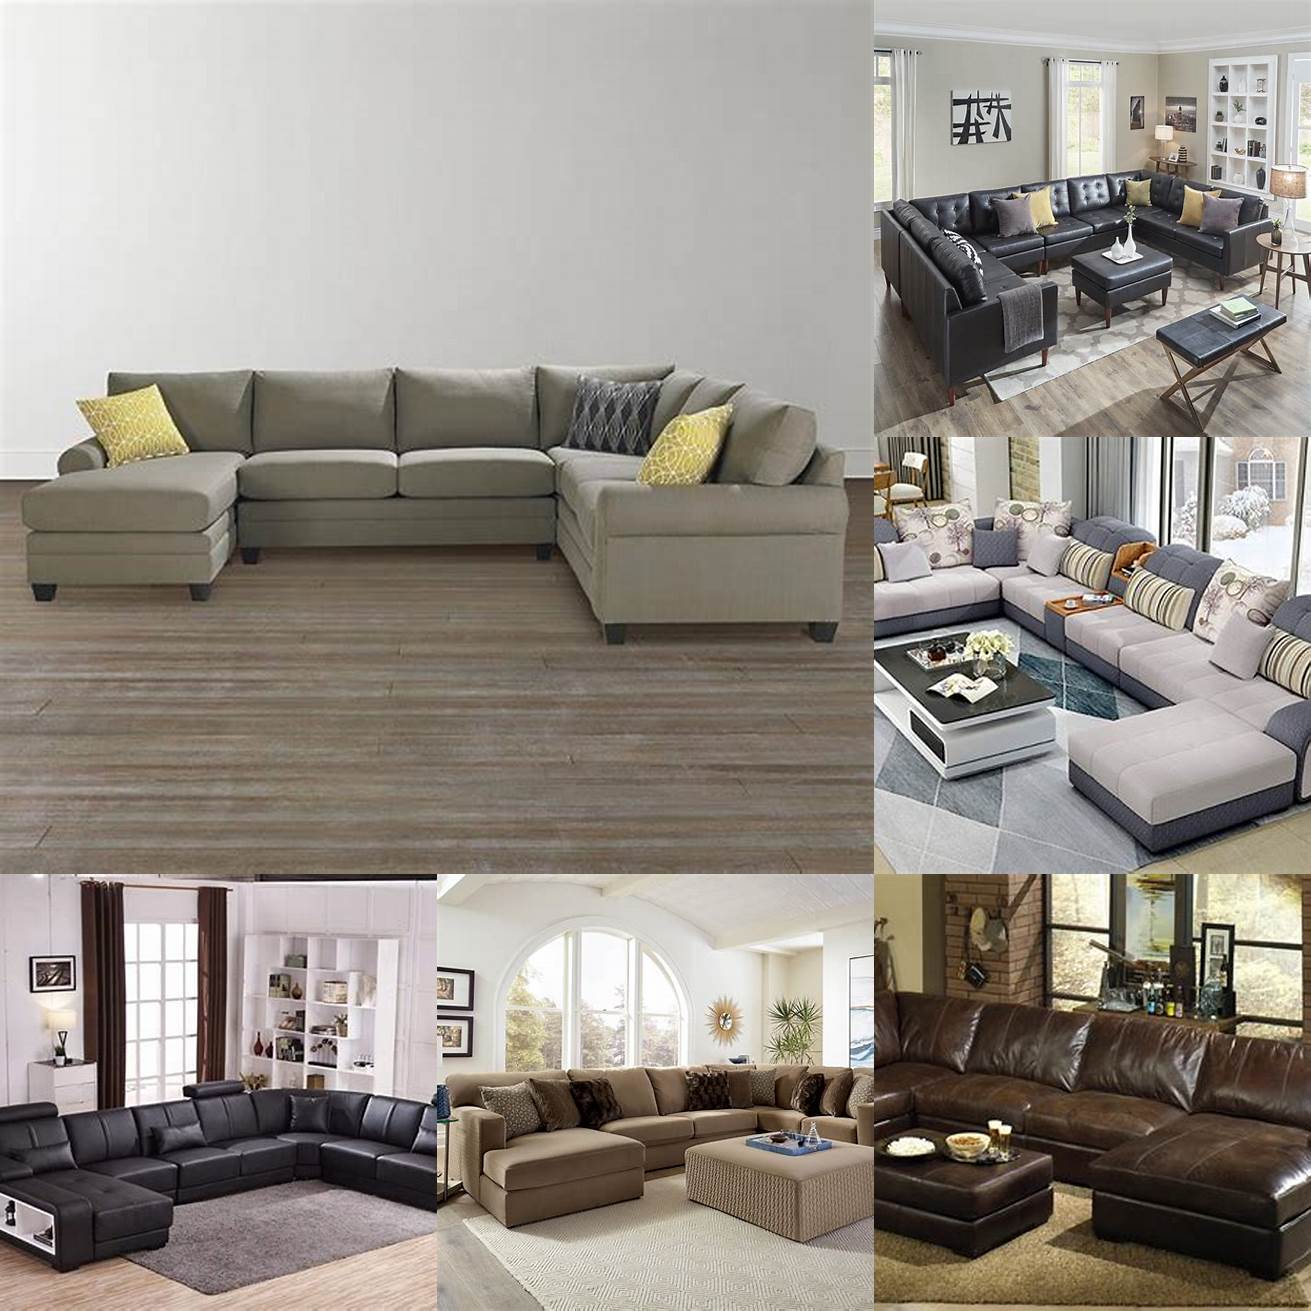 Leather U shaped sectional sofas are durable and easy to clean